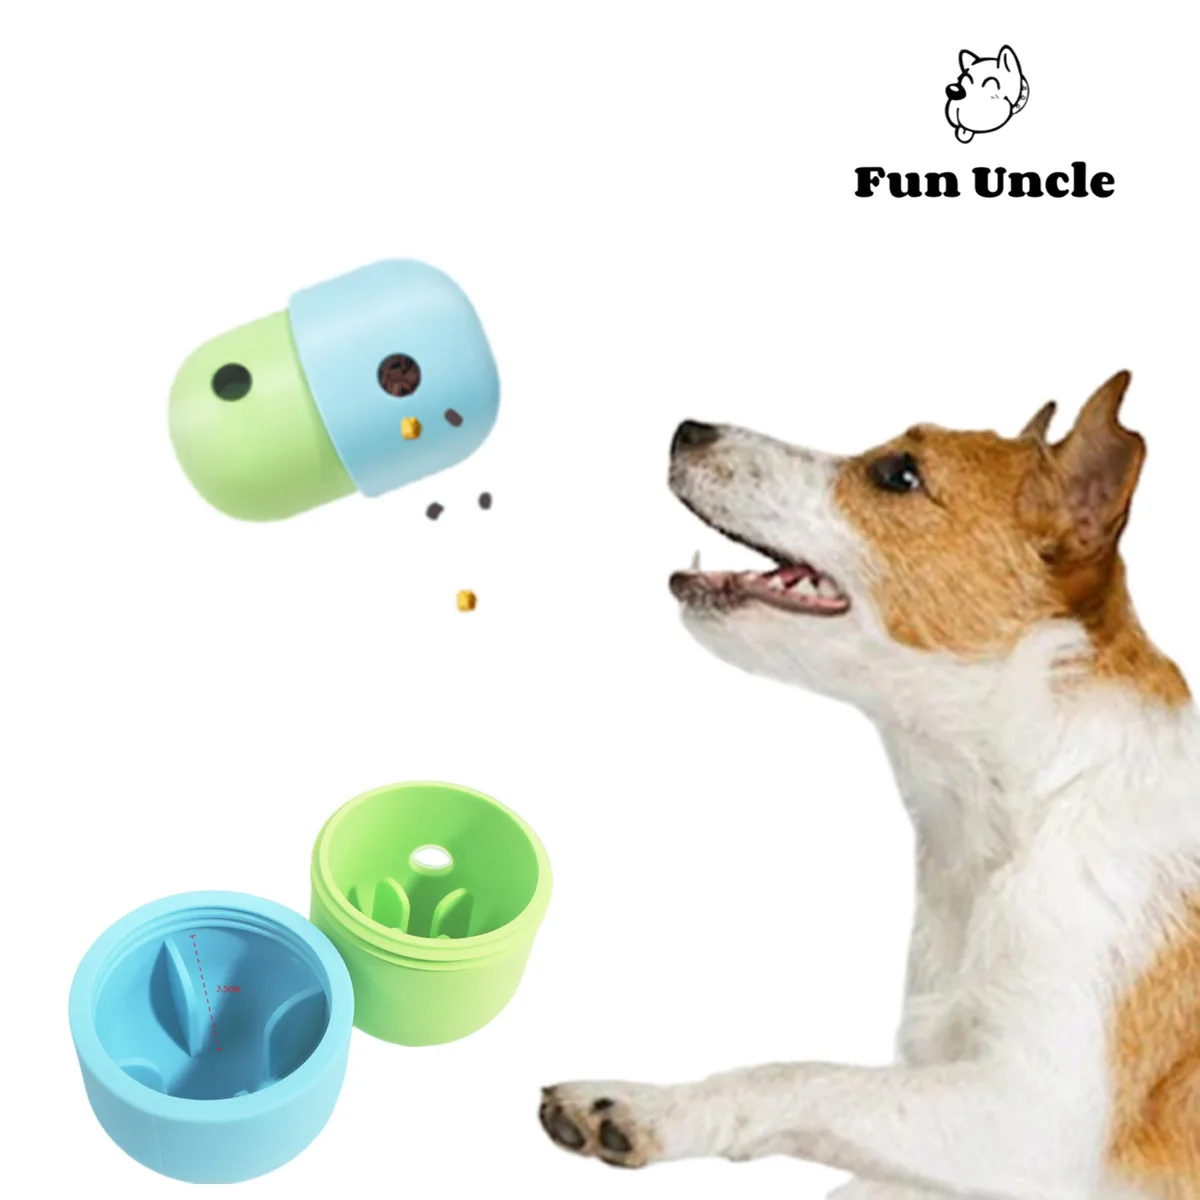 

Dog Leaky Toy, Snack Leakage Chew Ball, Outdoor Interaction Training Thrower Slow food toys, Pet Puzzle and IQ Improvement Toys